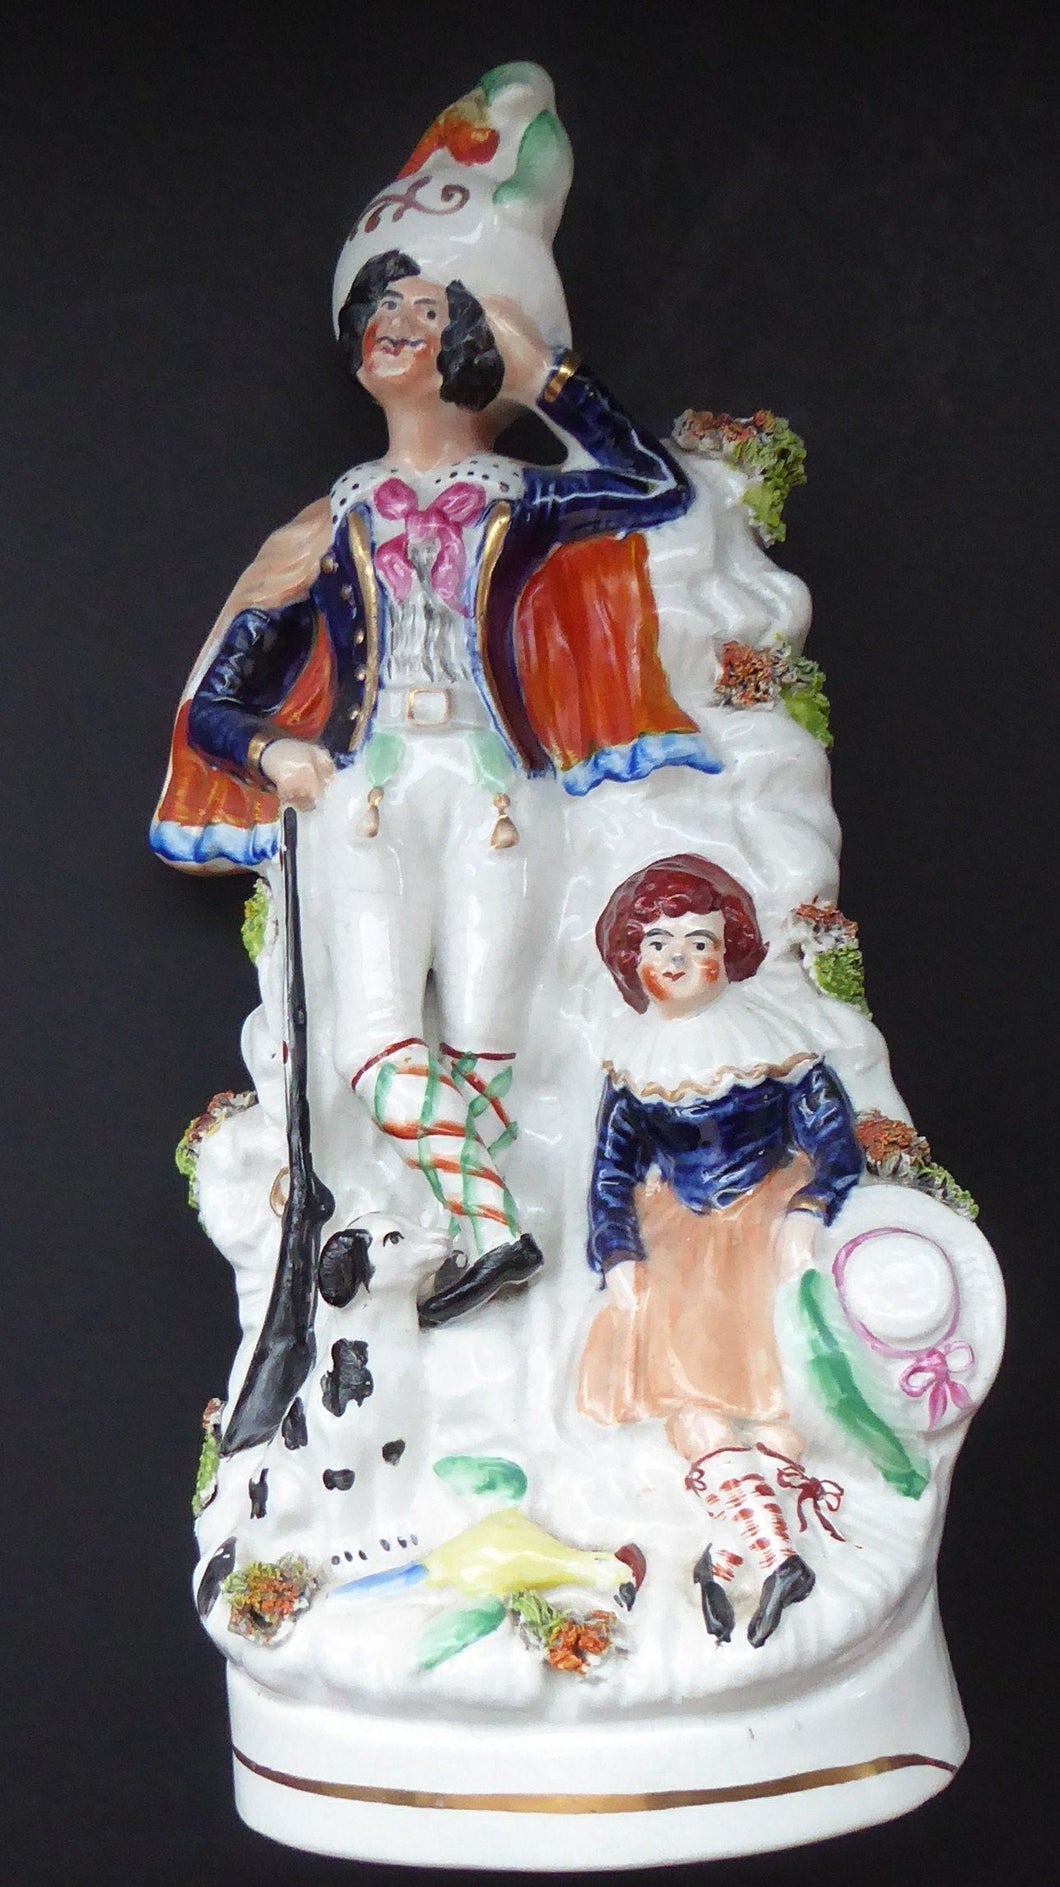 Antique STAFFORDSHIRE Figurine. Rarer Group of Huntsman, Dog & Game, and Little Seated Girl. Excellent Condition. 11 1/4 inches high